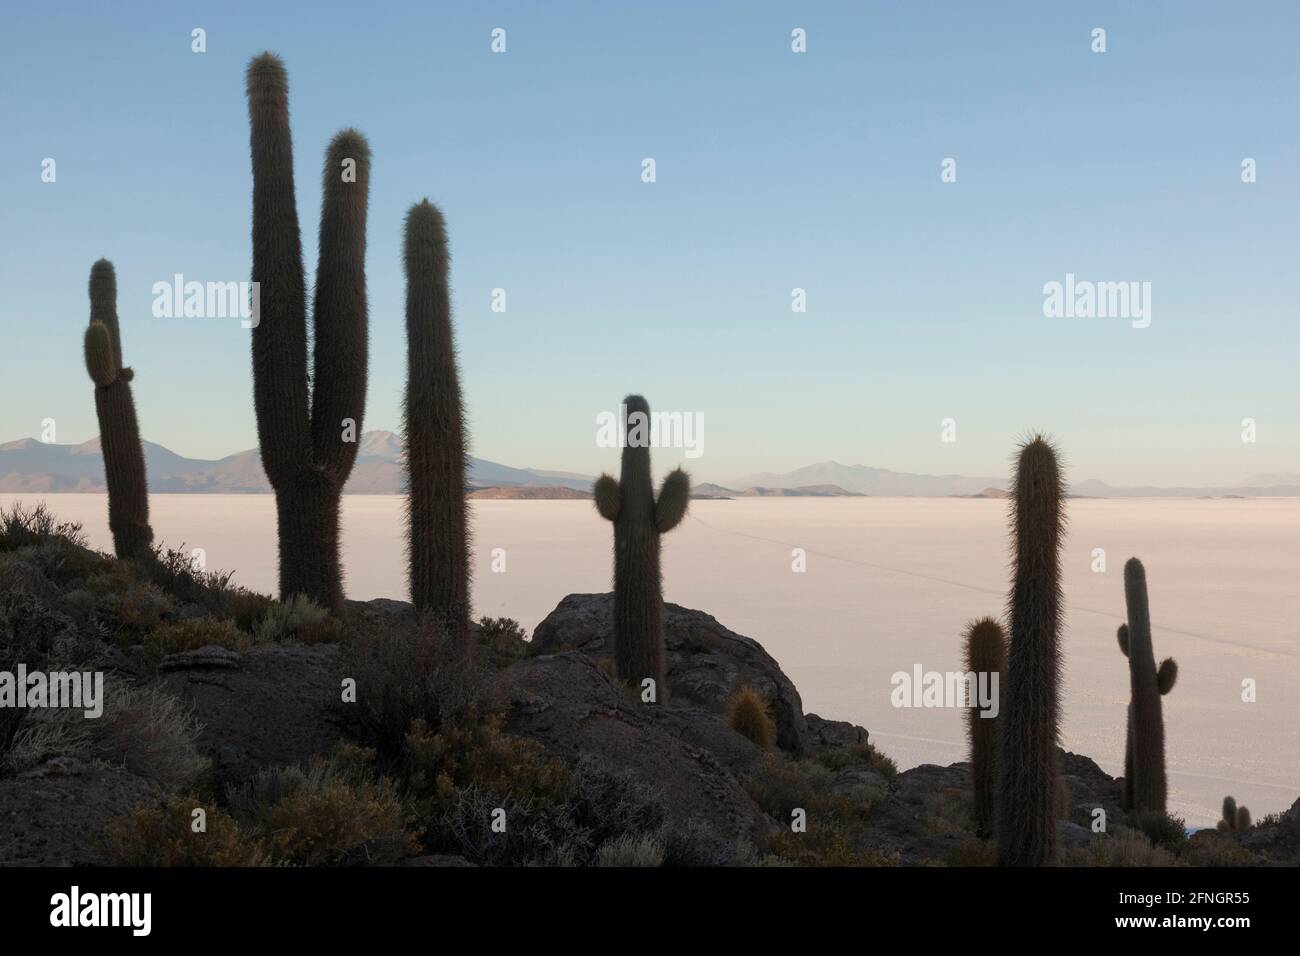 Overlooked by a cacti covered rock outcrop, distant SUV overland safari vehicles cross Bolivia's Salar de Uyuni salt-flats at dawn. Stock Photo